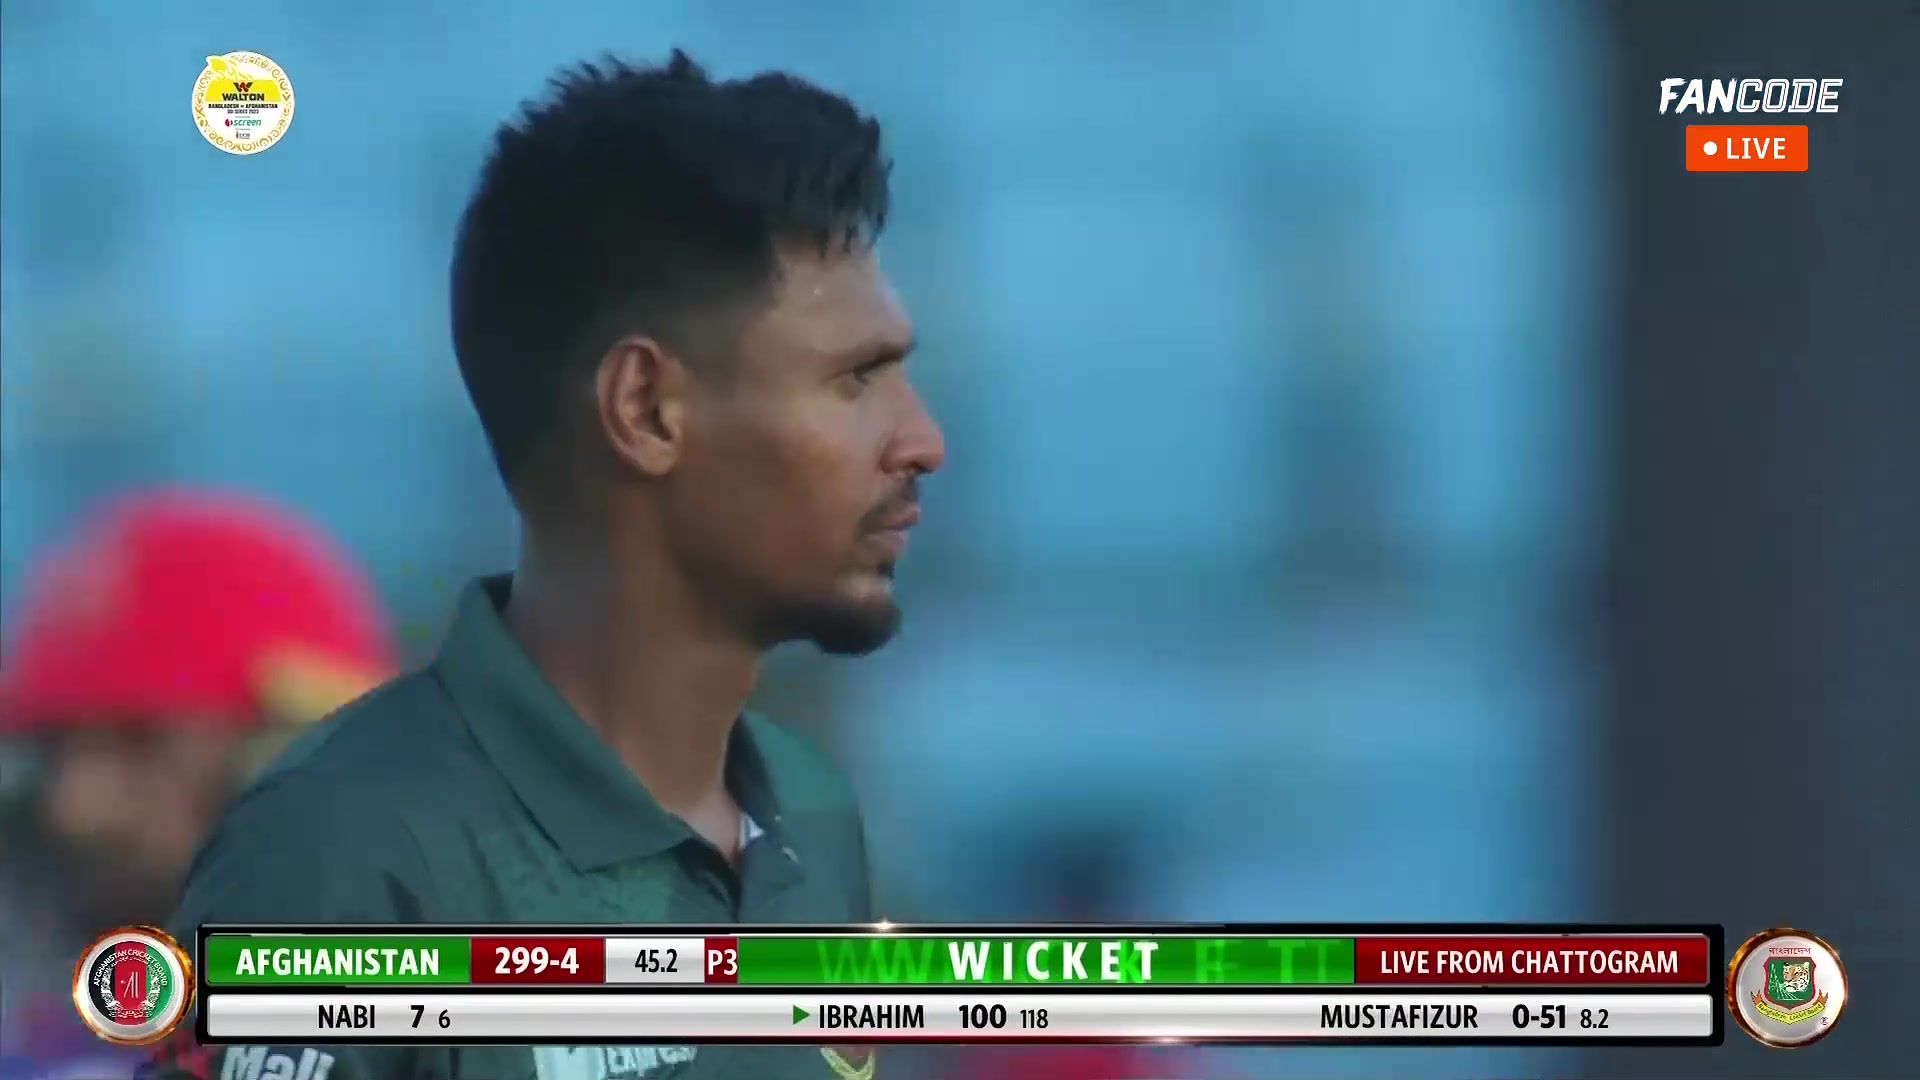 Wicket! Ibrahim Zadran Hits High In The Air And Gives Najmul Hossain Shanto Enough Time To Come Under It